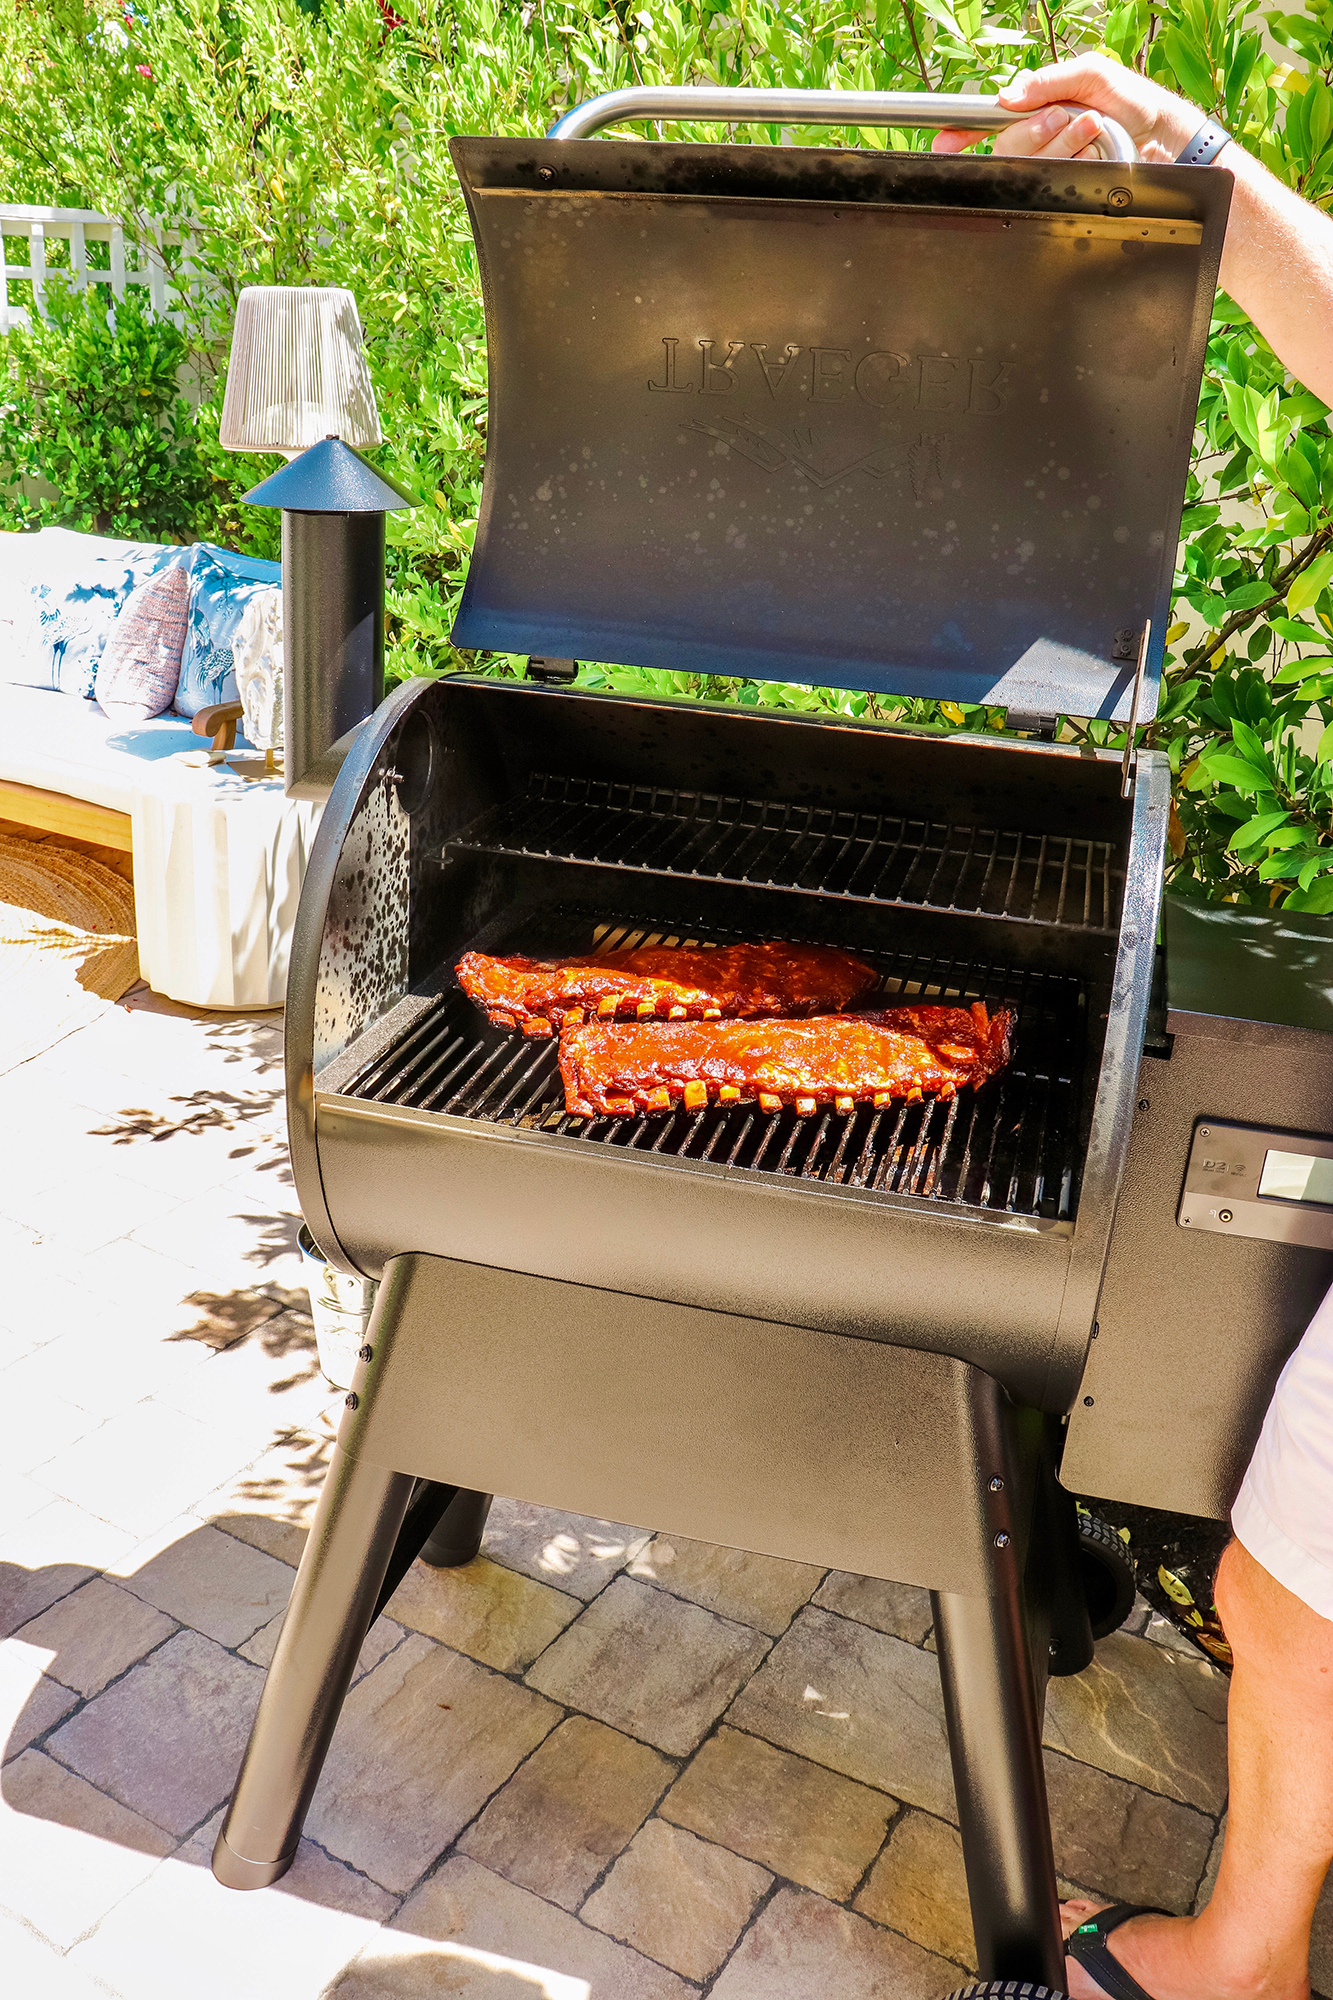 Jeff's DIY Smoker & Grill Station - Affordable Way to Upgrade and Add a Grilling & Smoking Station in your backyard for the summer. 